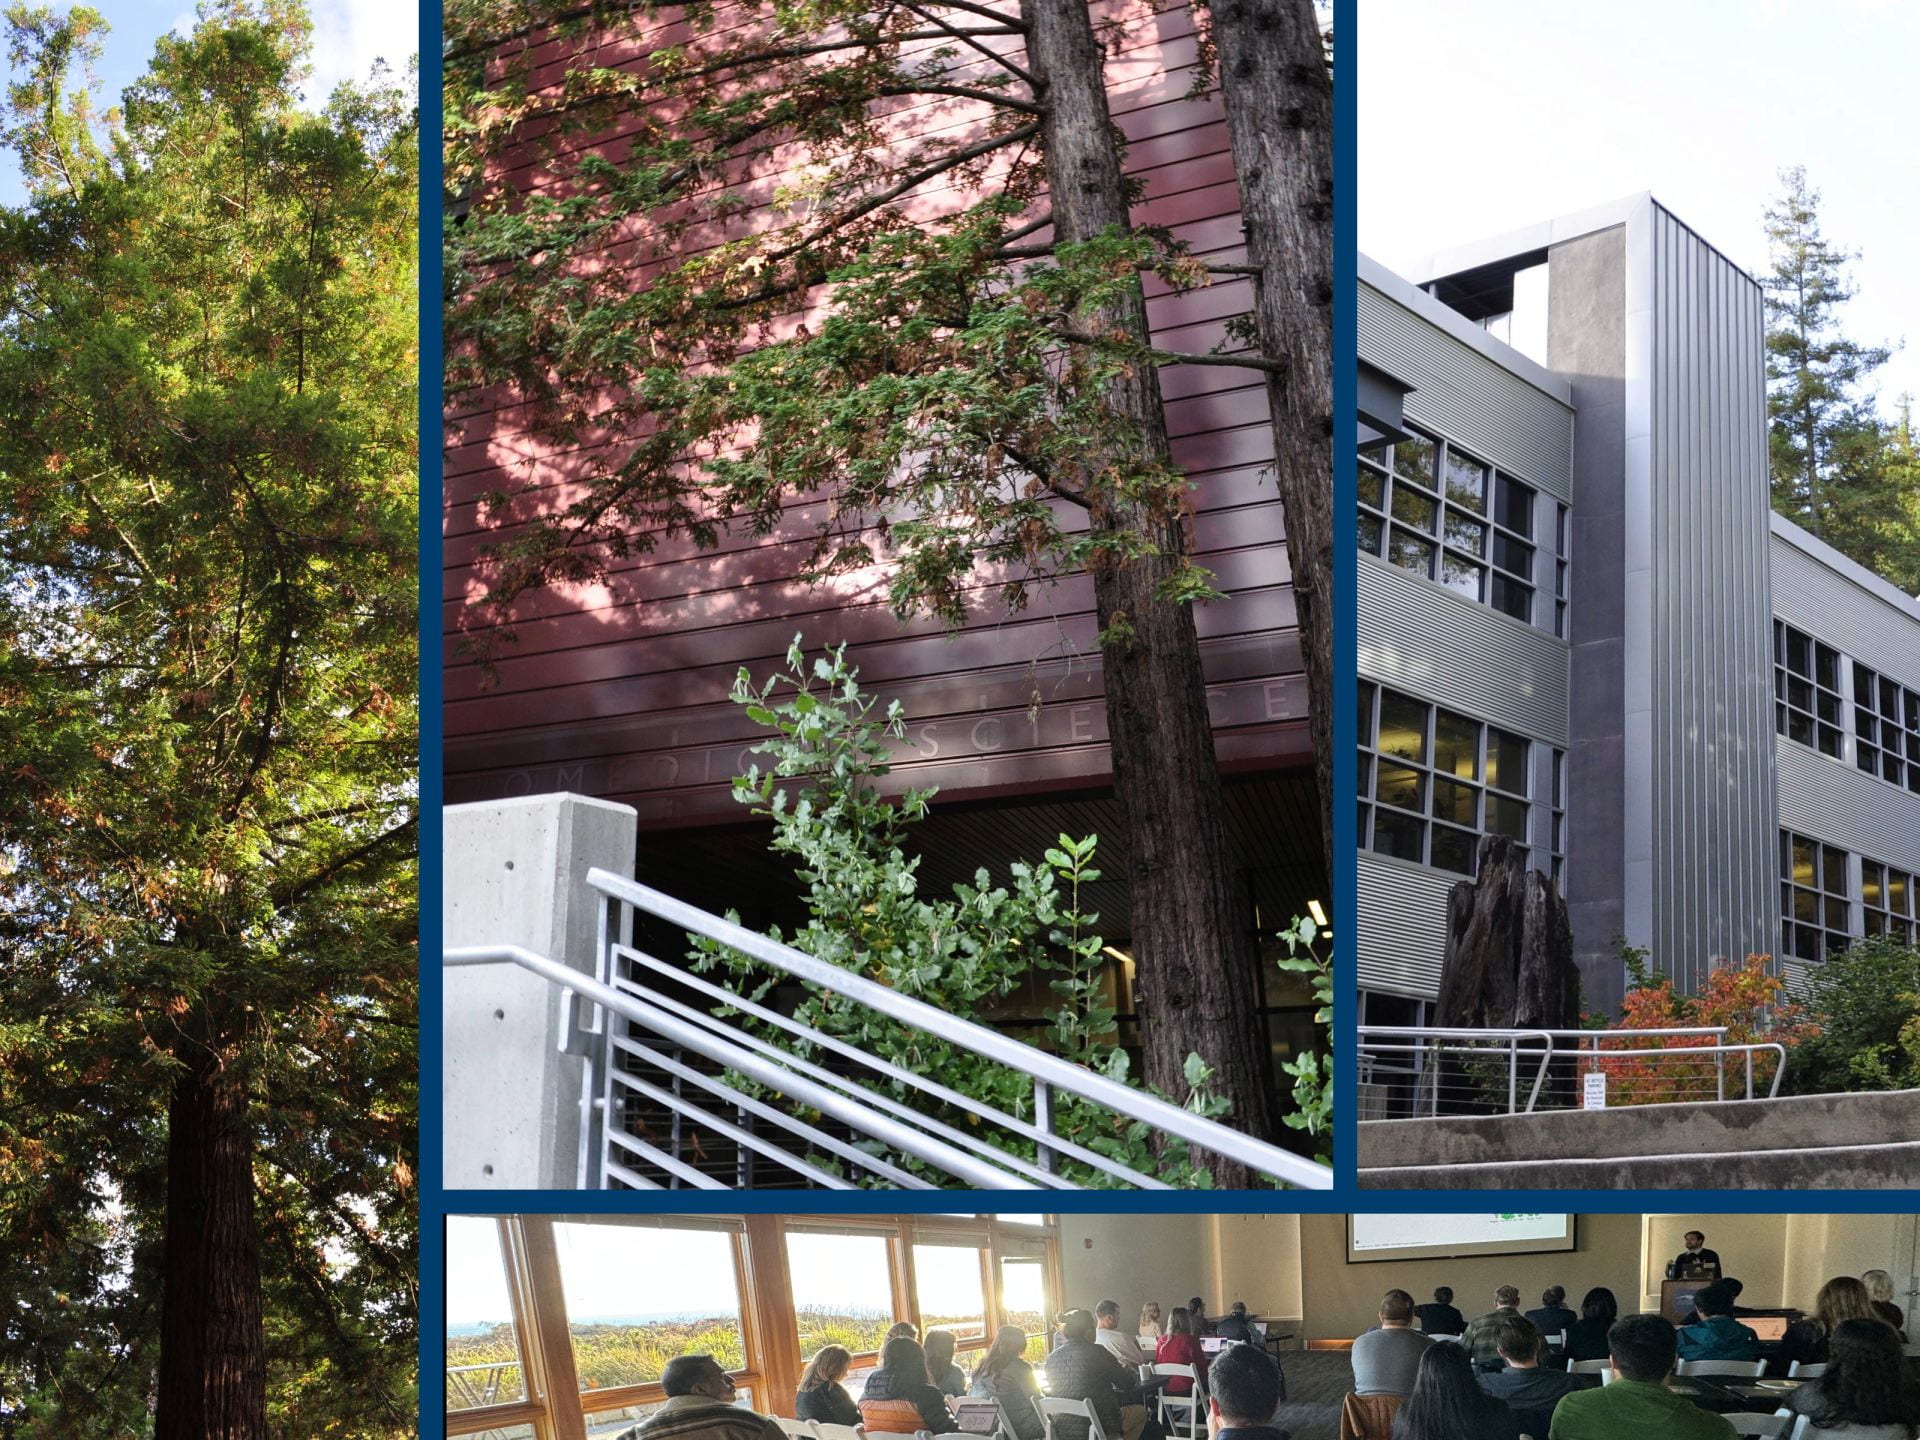 Industry Day Hero Image showing UCSC Campus